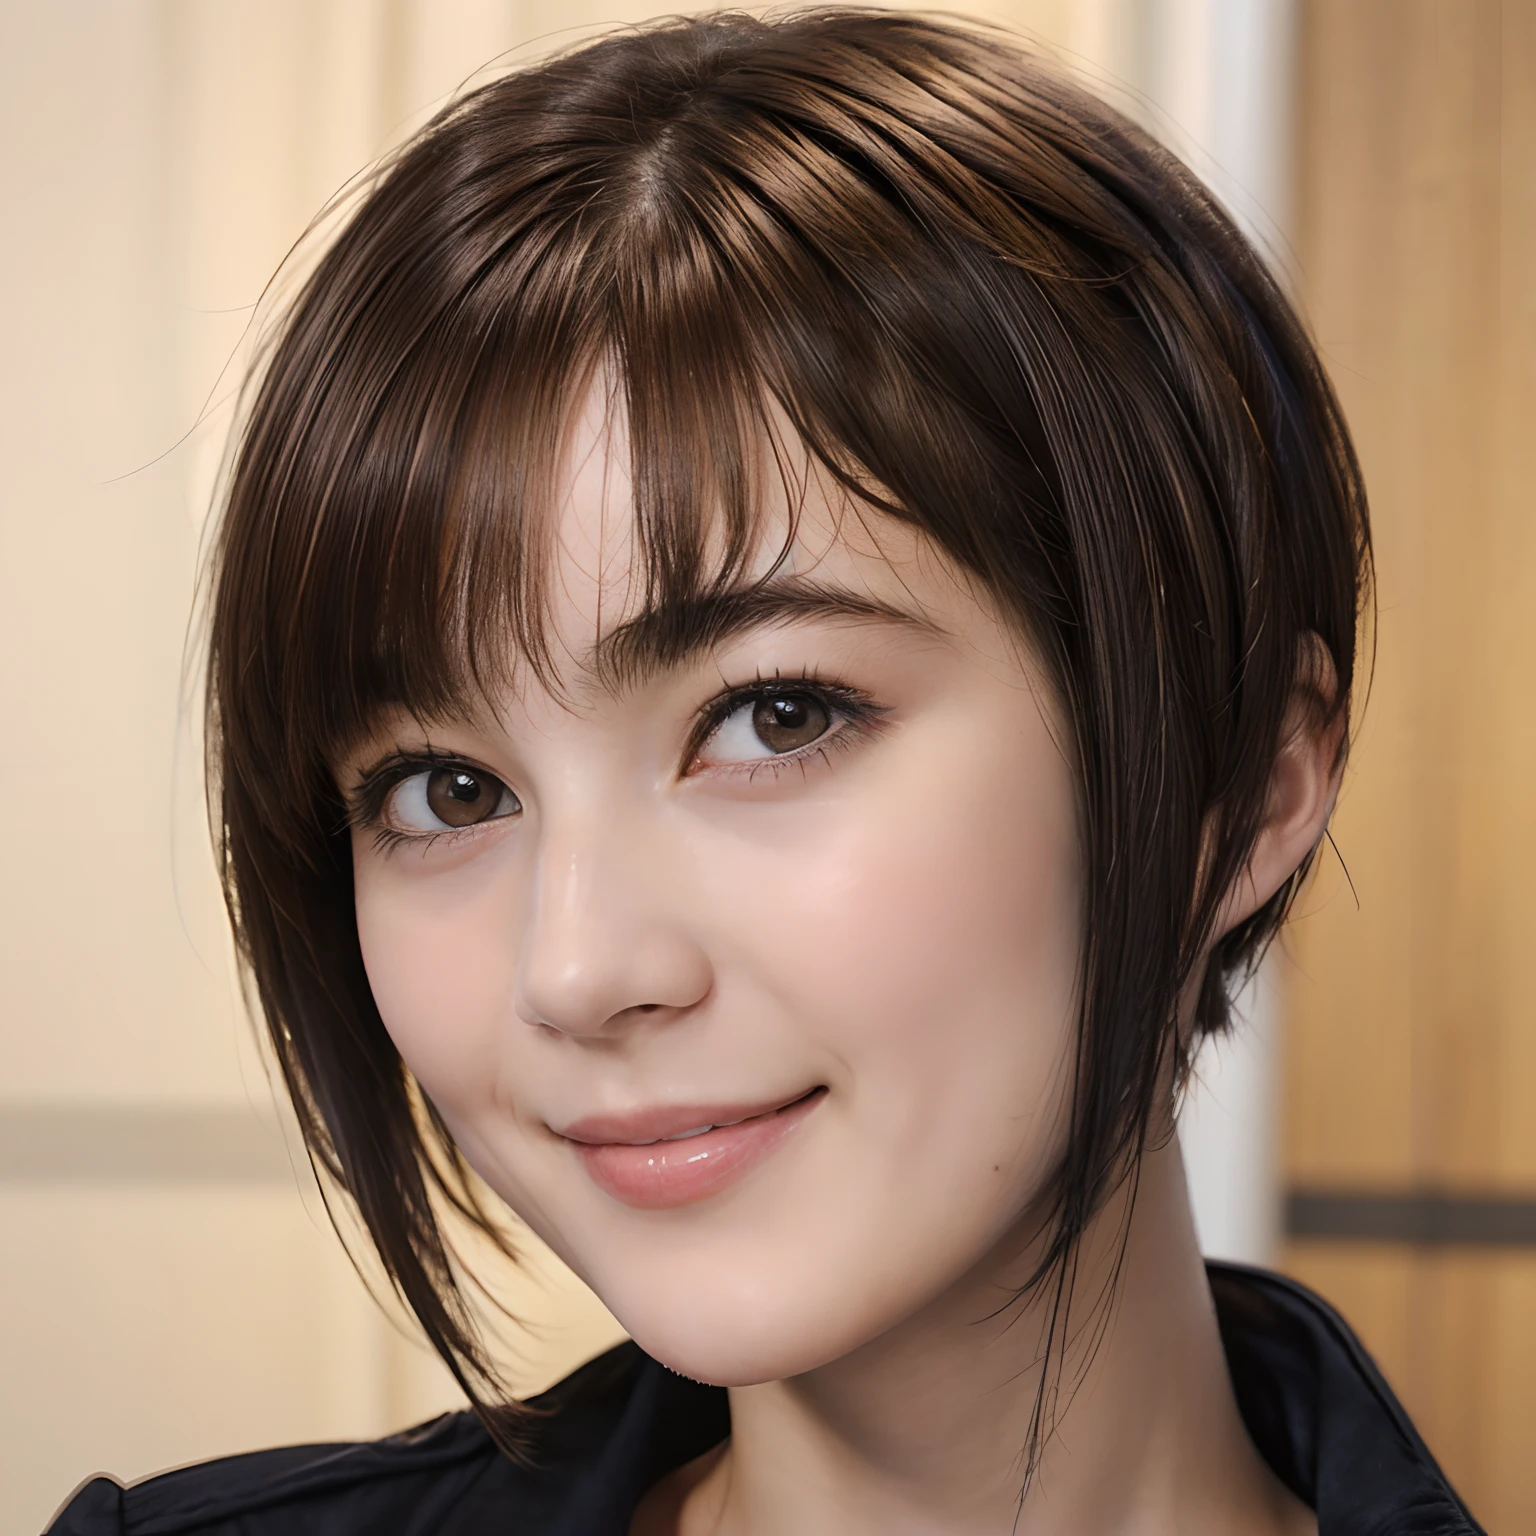 97
(a 20 yo woman,is standing), (A hyper-realistic), (high-level image quality), ((short-hair:1.46)), (Hair smooth), (Gentle smile), (Keep your mouth shut)